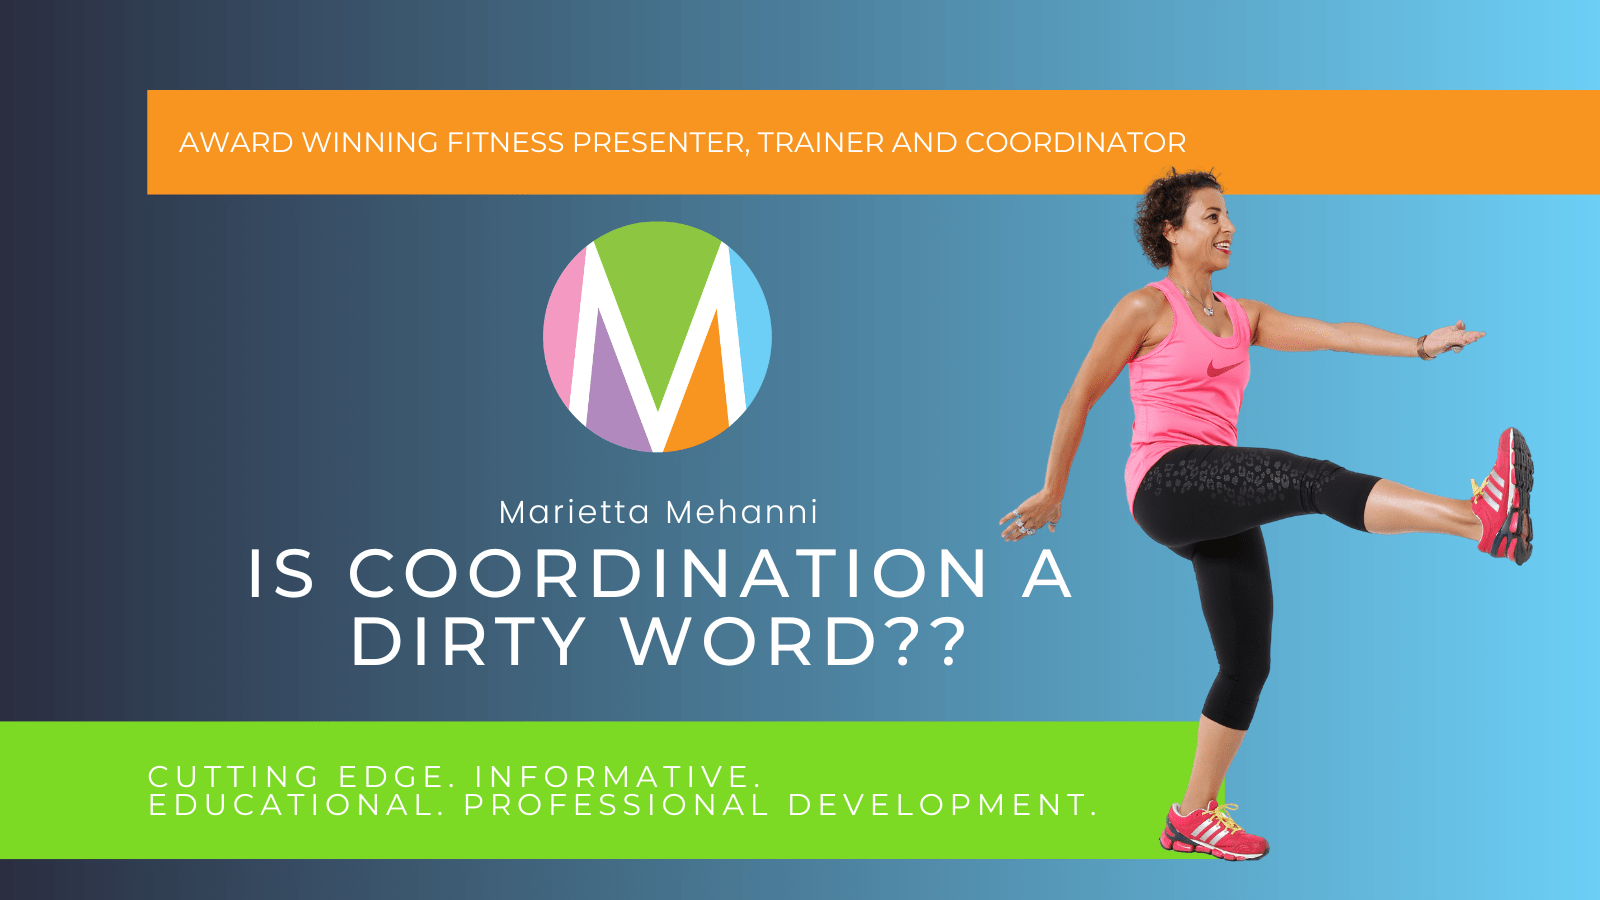 Is Coordination a dirty word, Marietta Mehanni, making workouts more mentally challenging, increasing neural pathways